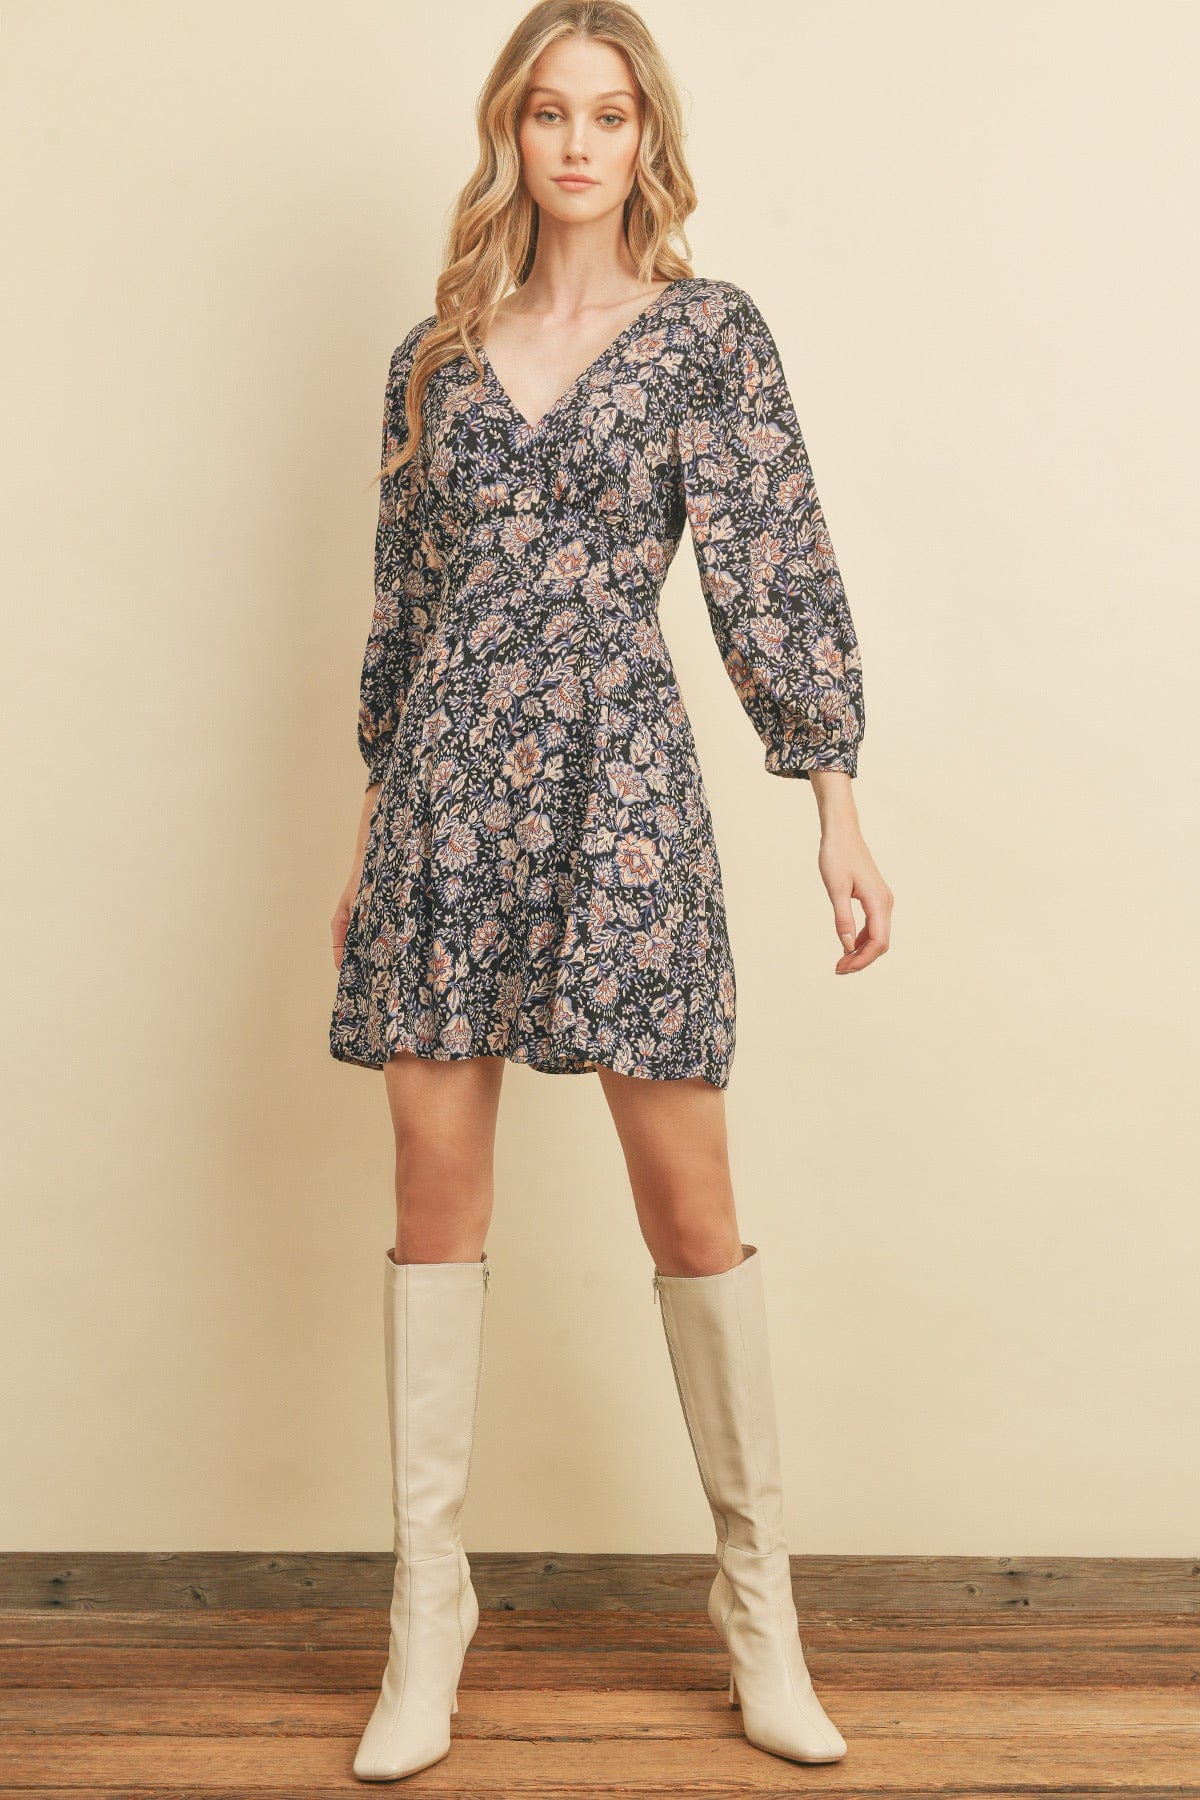 Presley Paisley Floral Print Dress in Navy - Dress - Blooming Daily